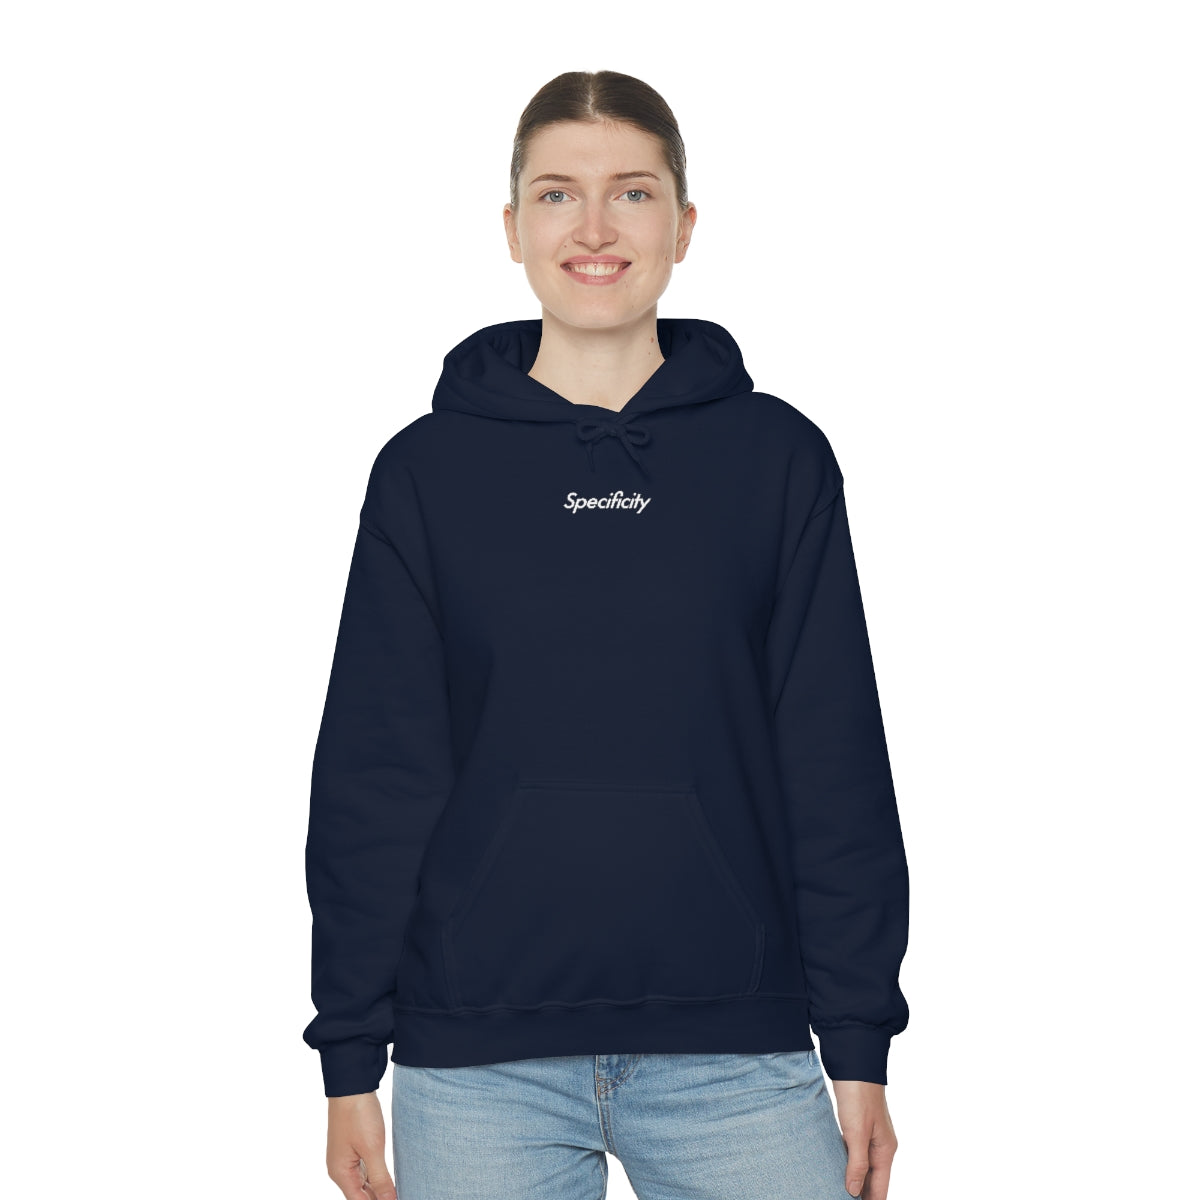 Load image into Gallery viewer, Specificity - Hooded Sweatshirt | Hoodie | PARADIS SVP
